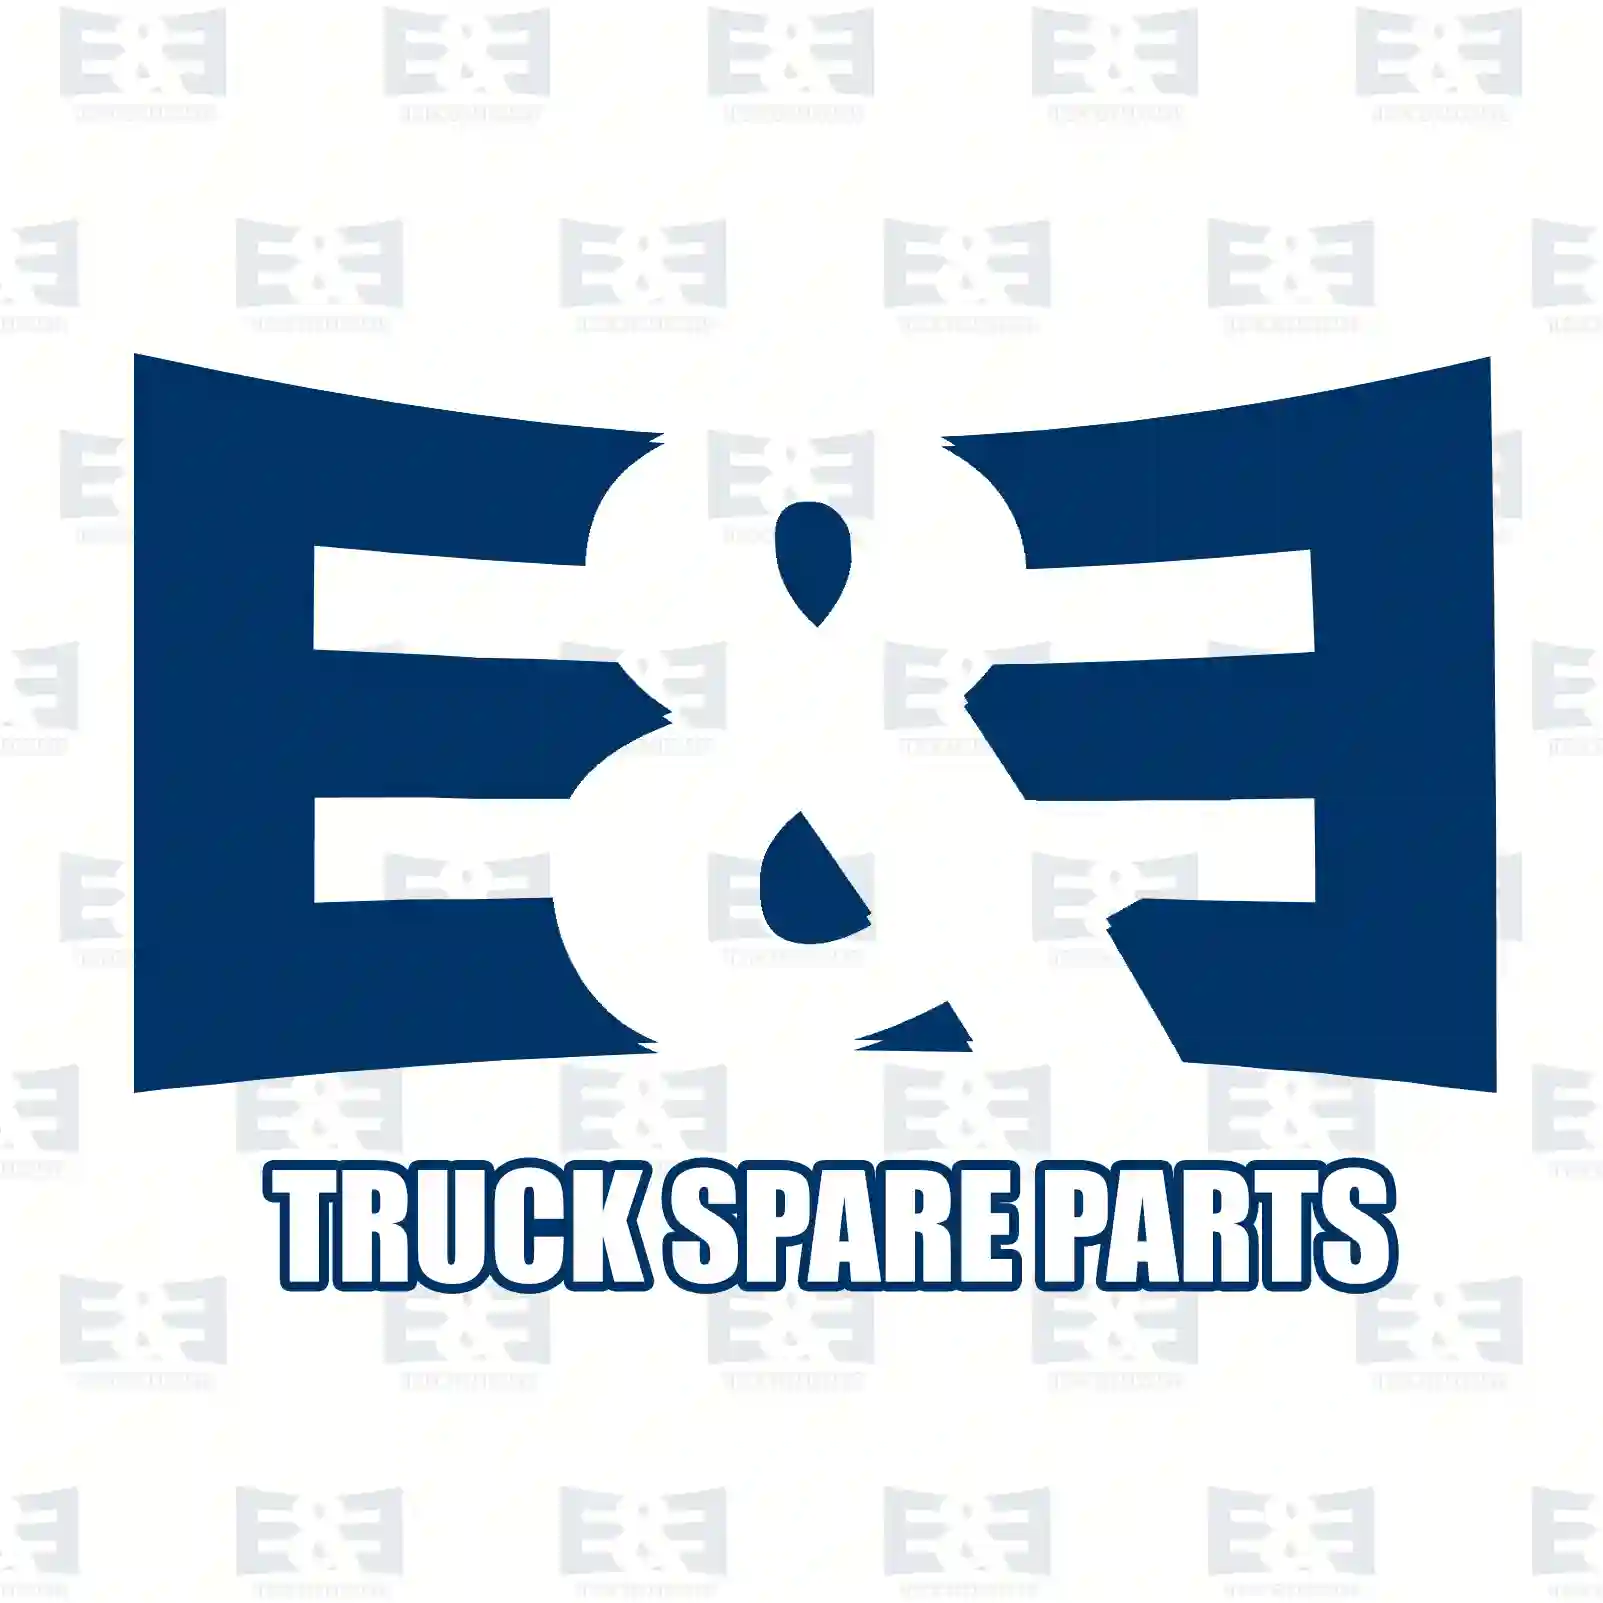  Kit, exhaust manifold, with seal rings || E&E Truck Spare Parts | Truck Spare Parts, Auotomotive Spare Parts